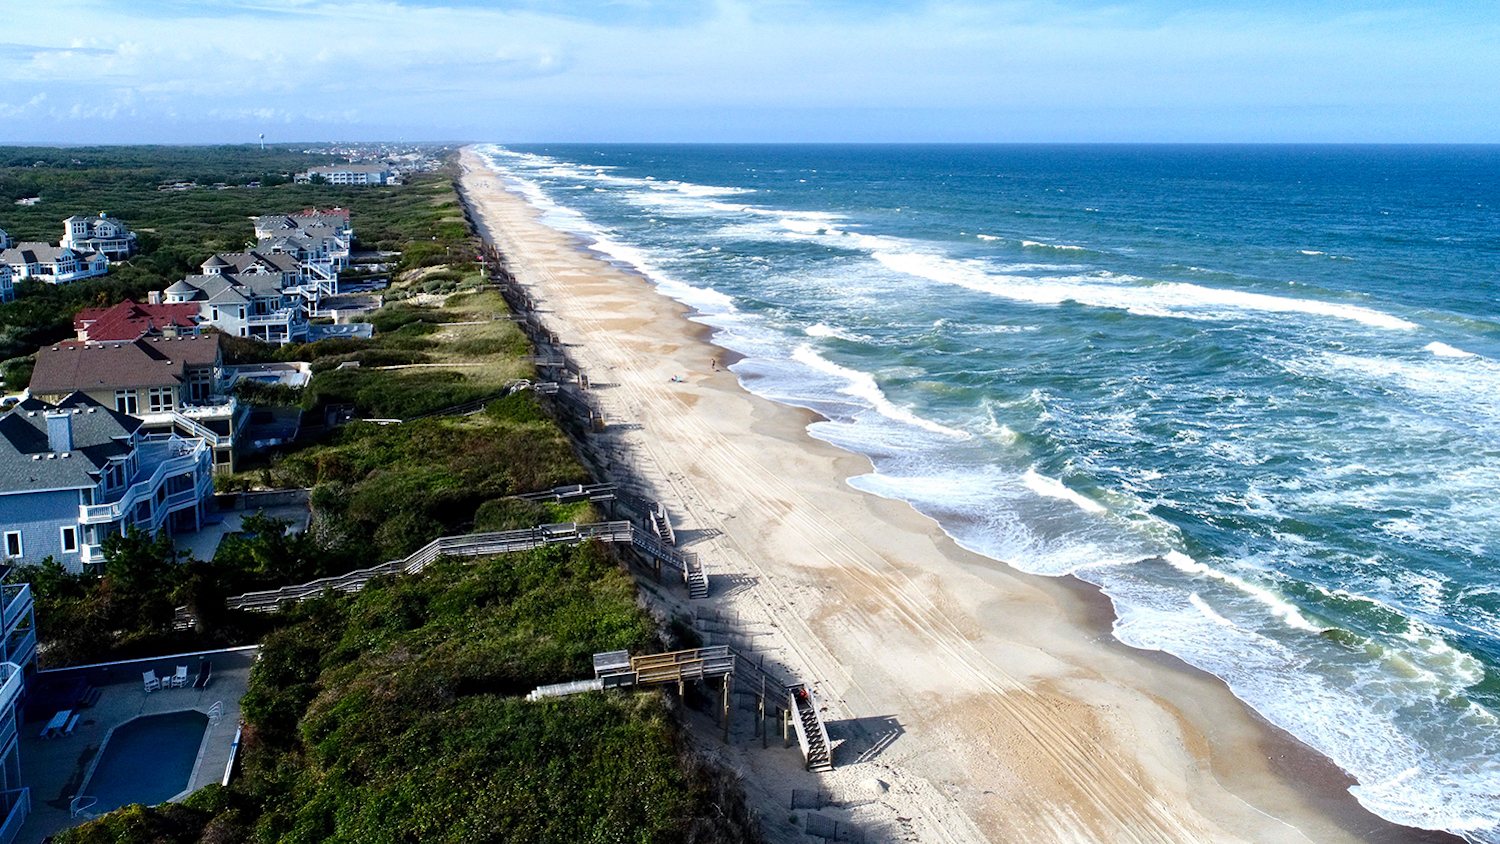 The coast of North Carolina's Corolla Beach in the Outer Banks - Changing Tides: Remaining Tourism in the Outer Banks - Parks Recreation and Tourism Management as NC State University